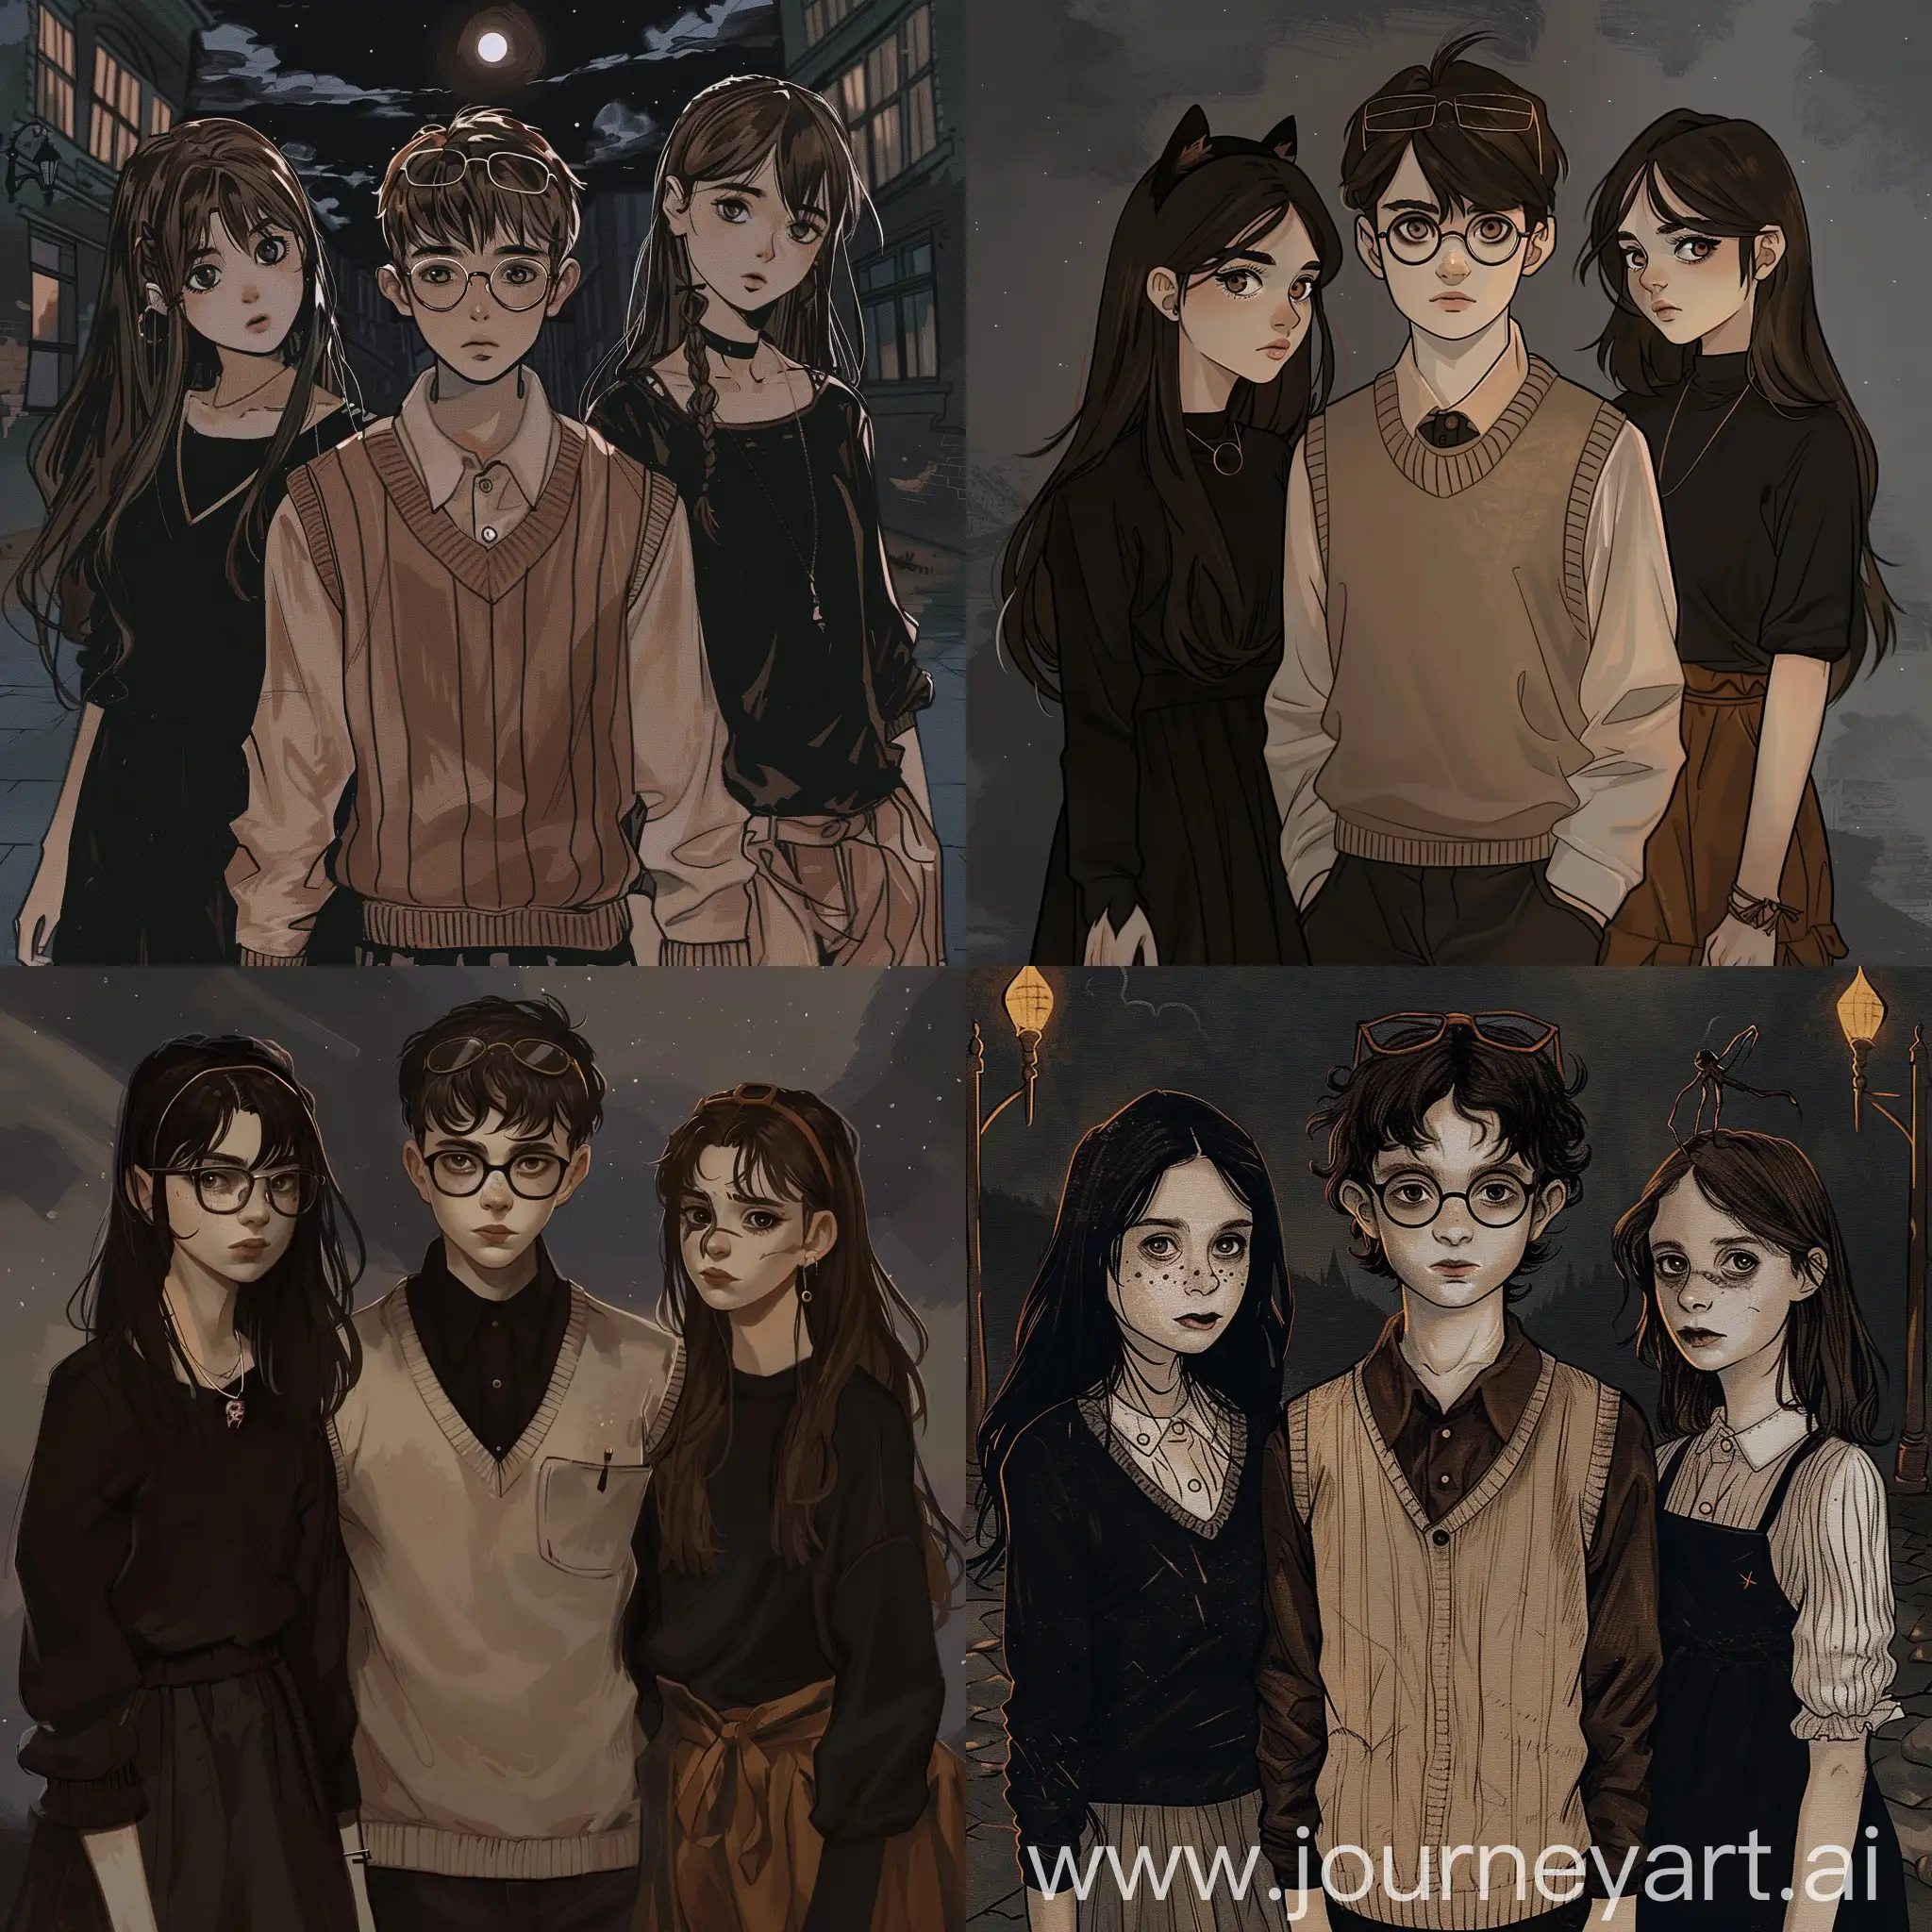 Three-Teenagers-Drawing-Together-in-Spooky-Night-Ambiance